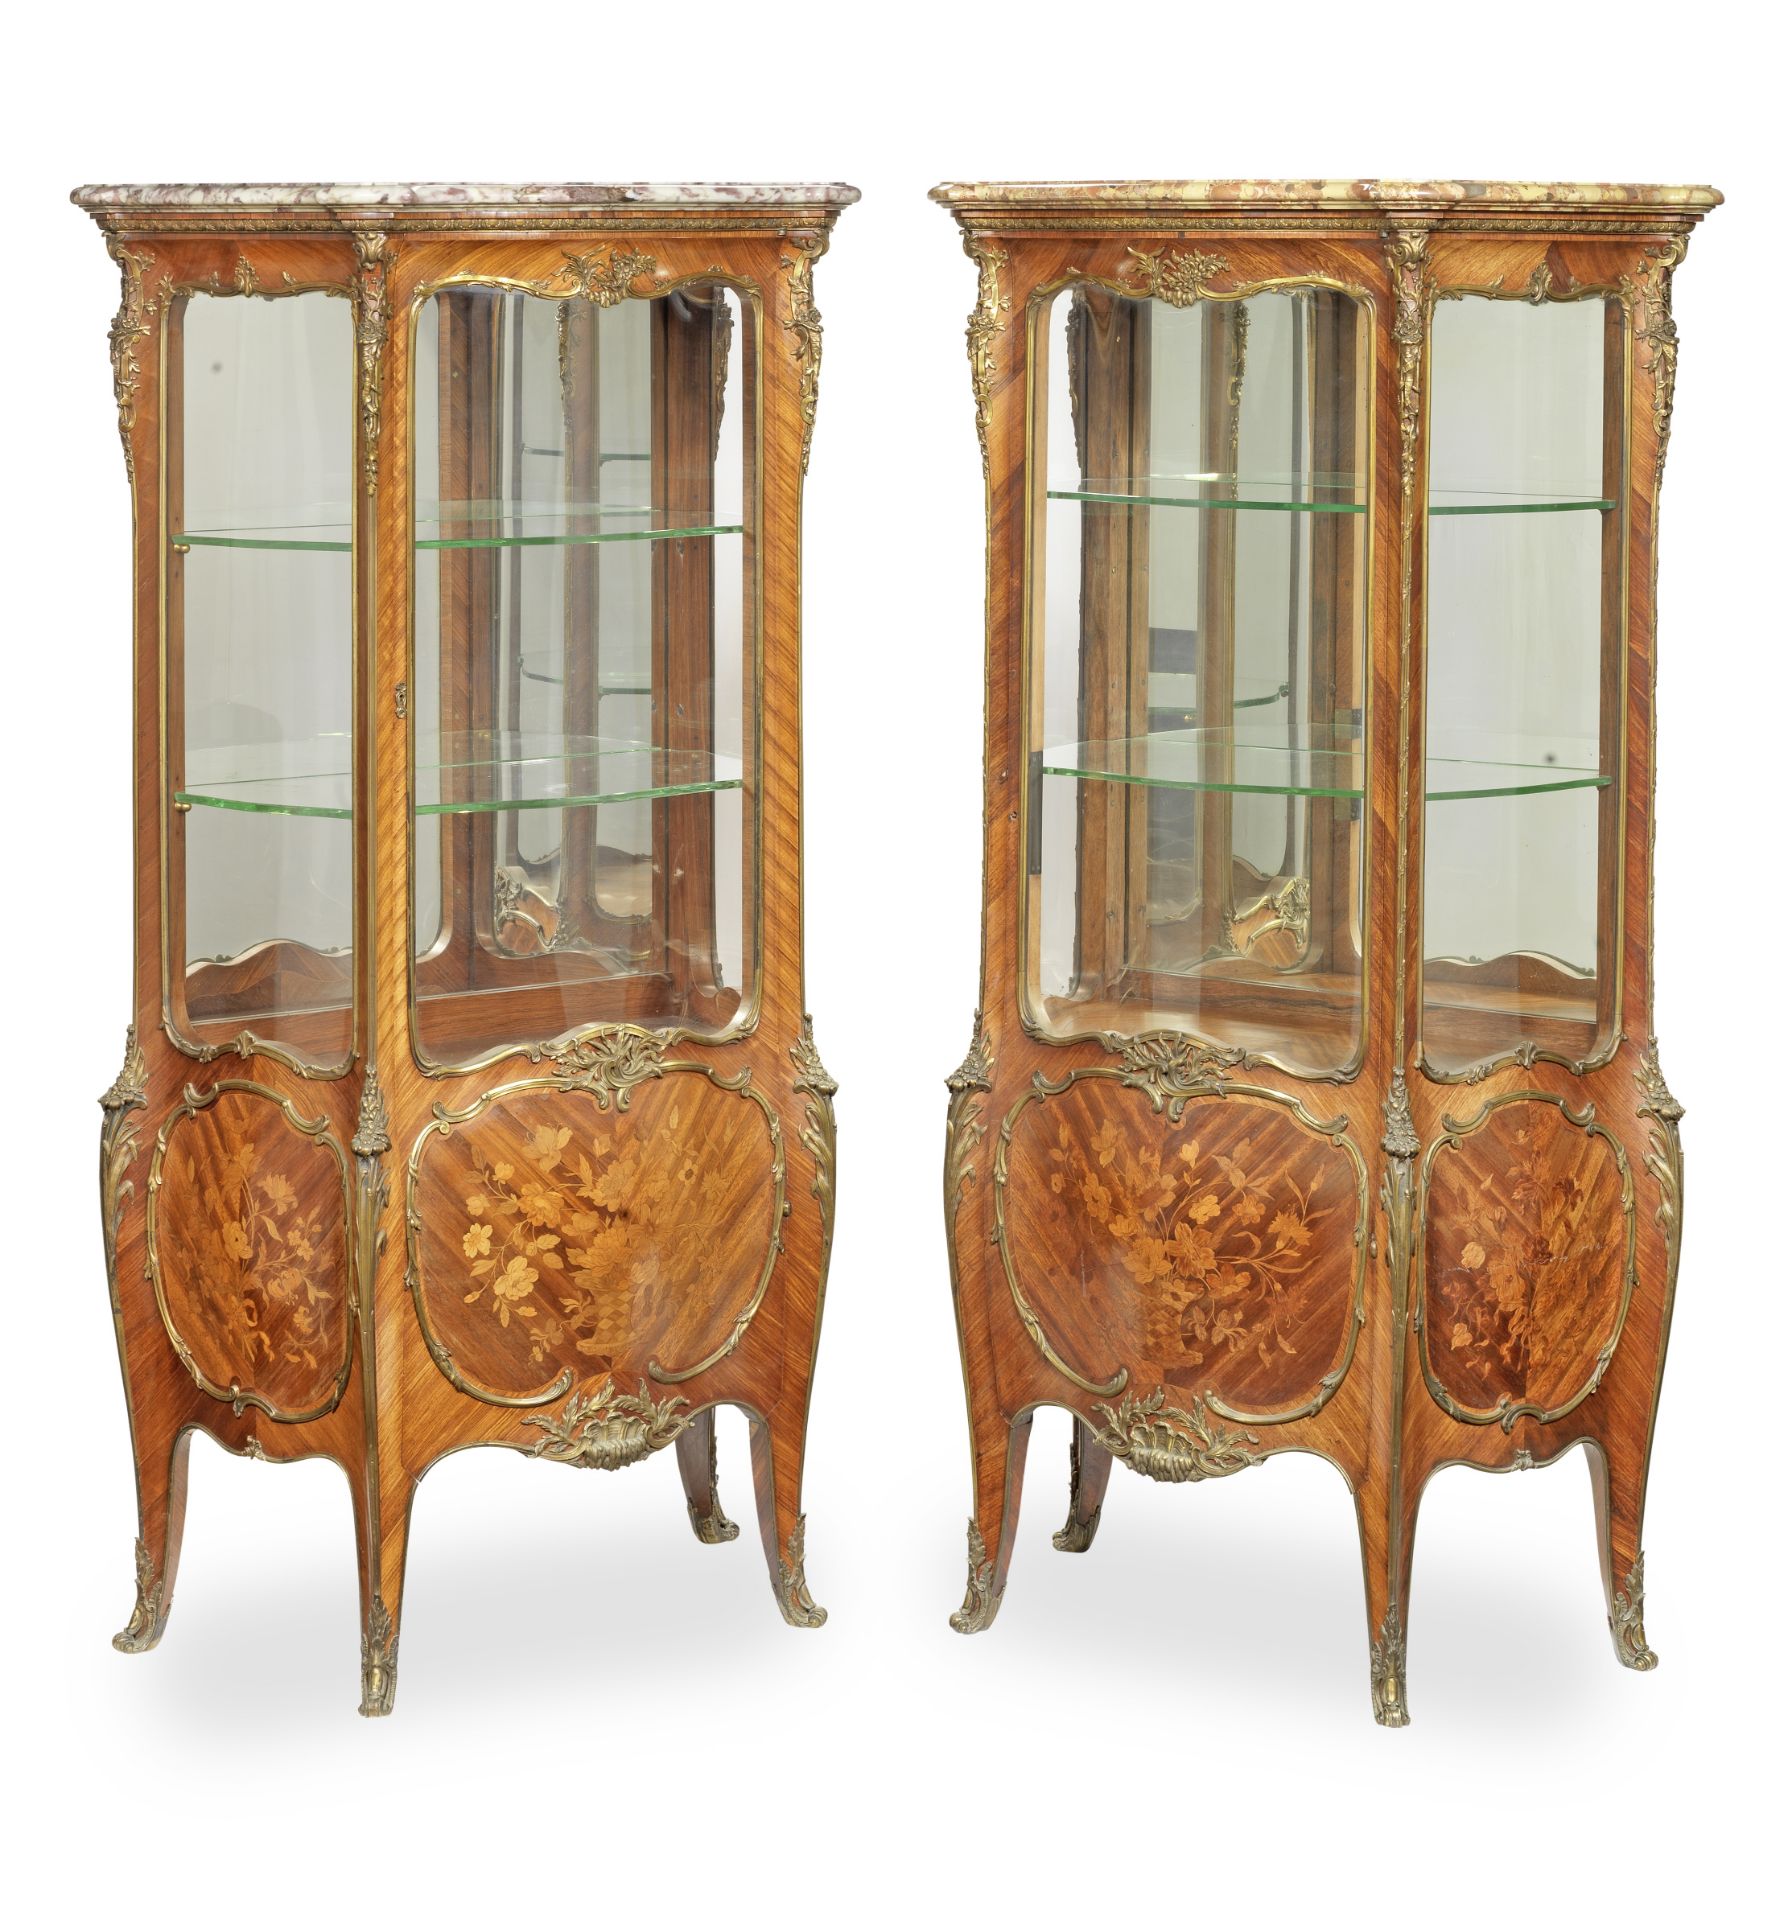 A pair of French late 19th century ormolu mounted kingwood, bois satine and marquetry bombe serpe...